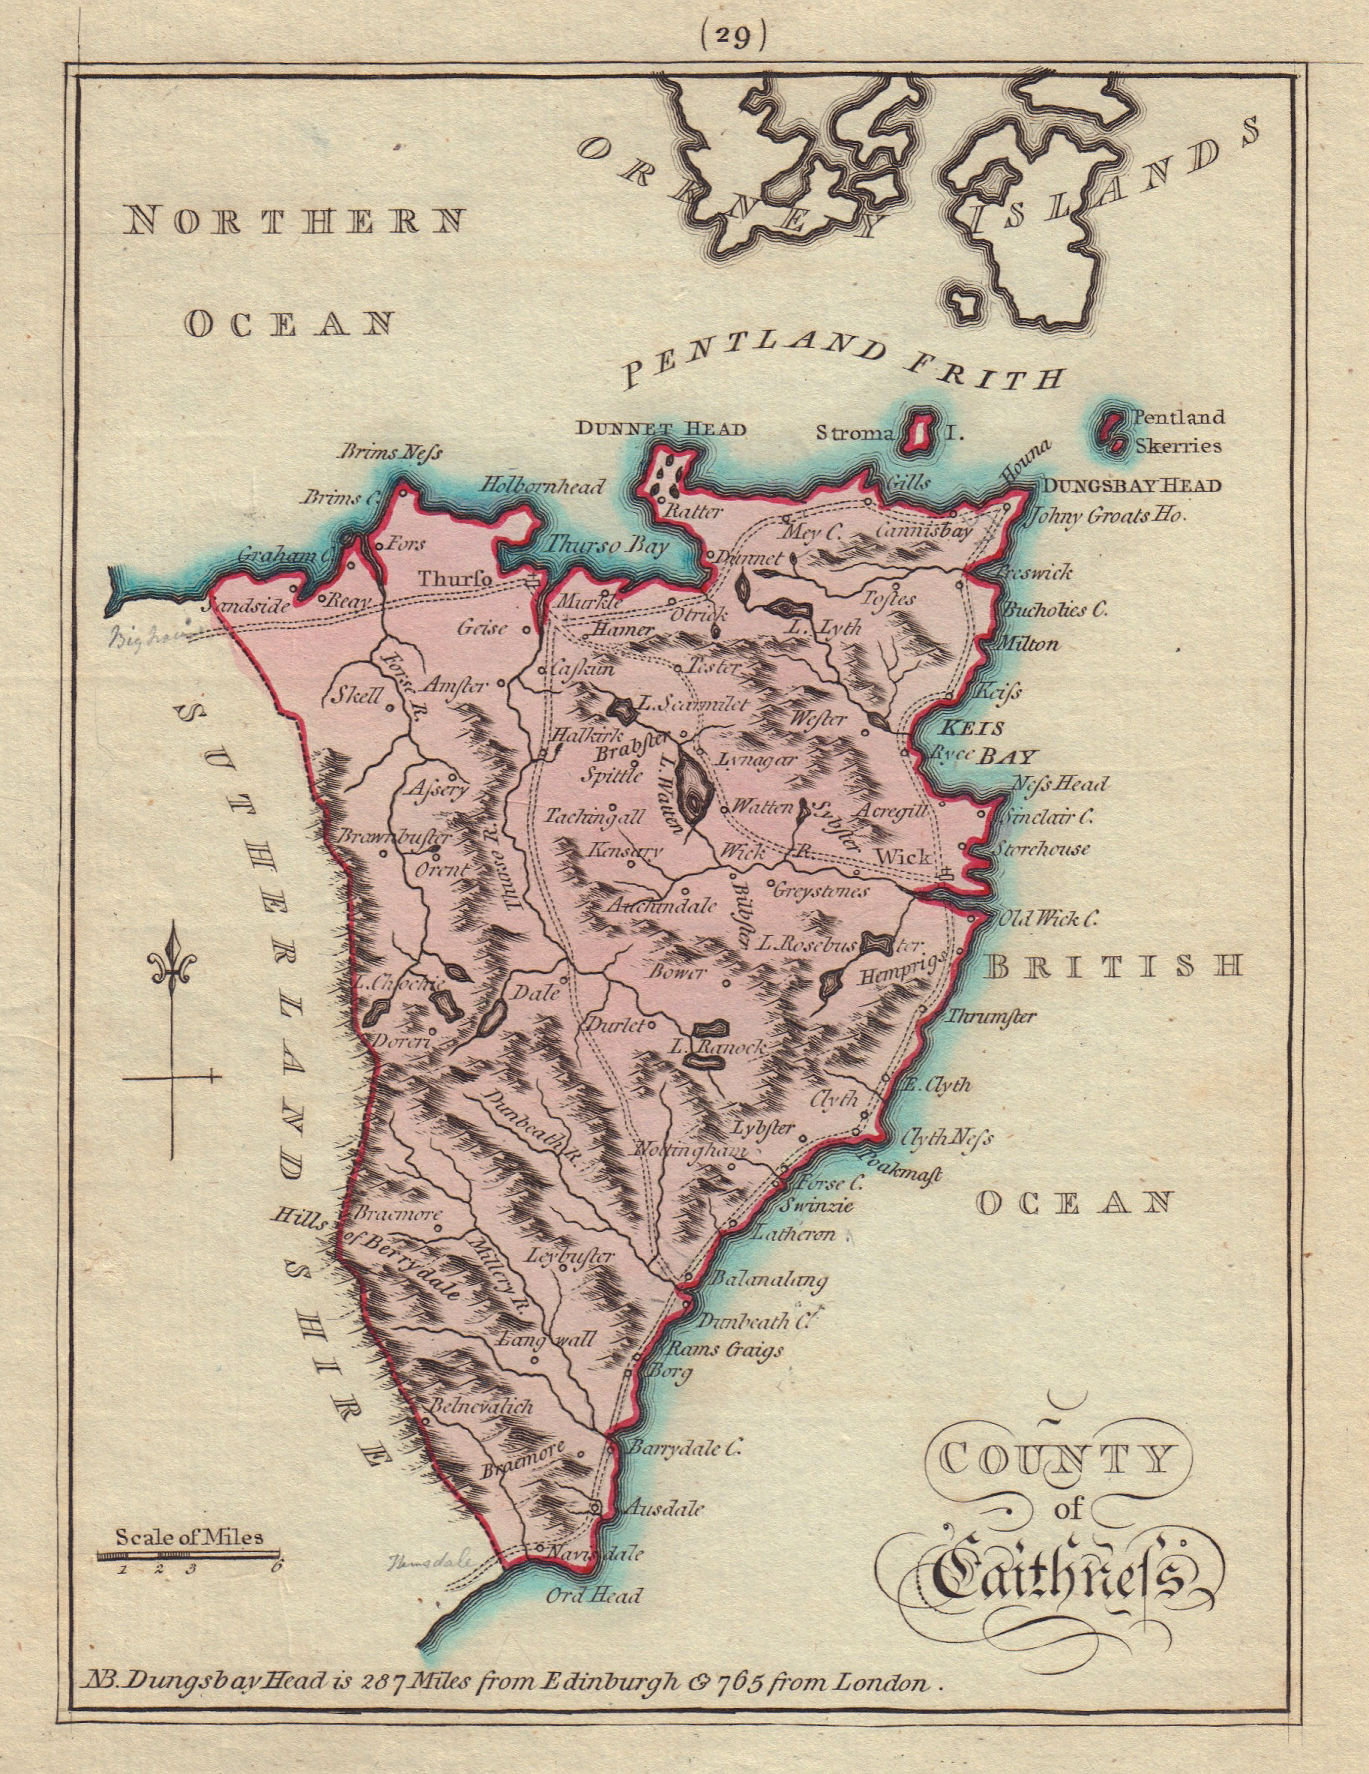 Associate Product County of Caithness. Caithness. SAYER / ARMSTRONG 1794 old antique map chart